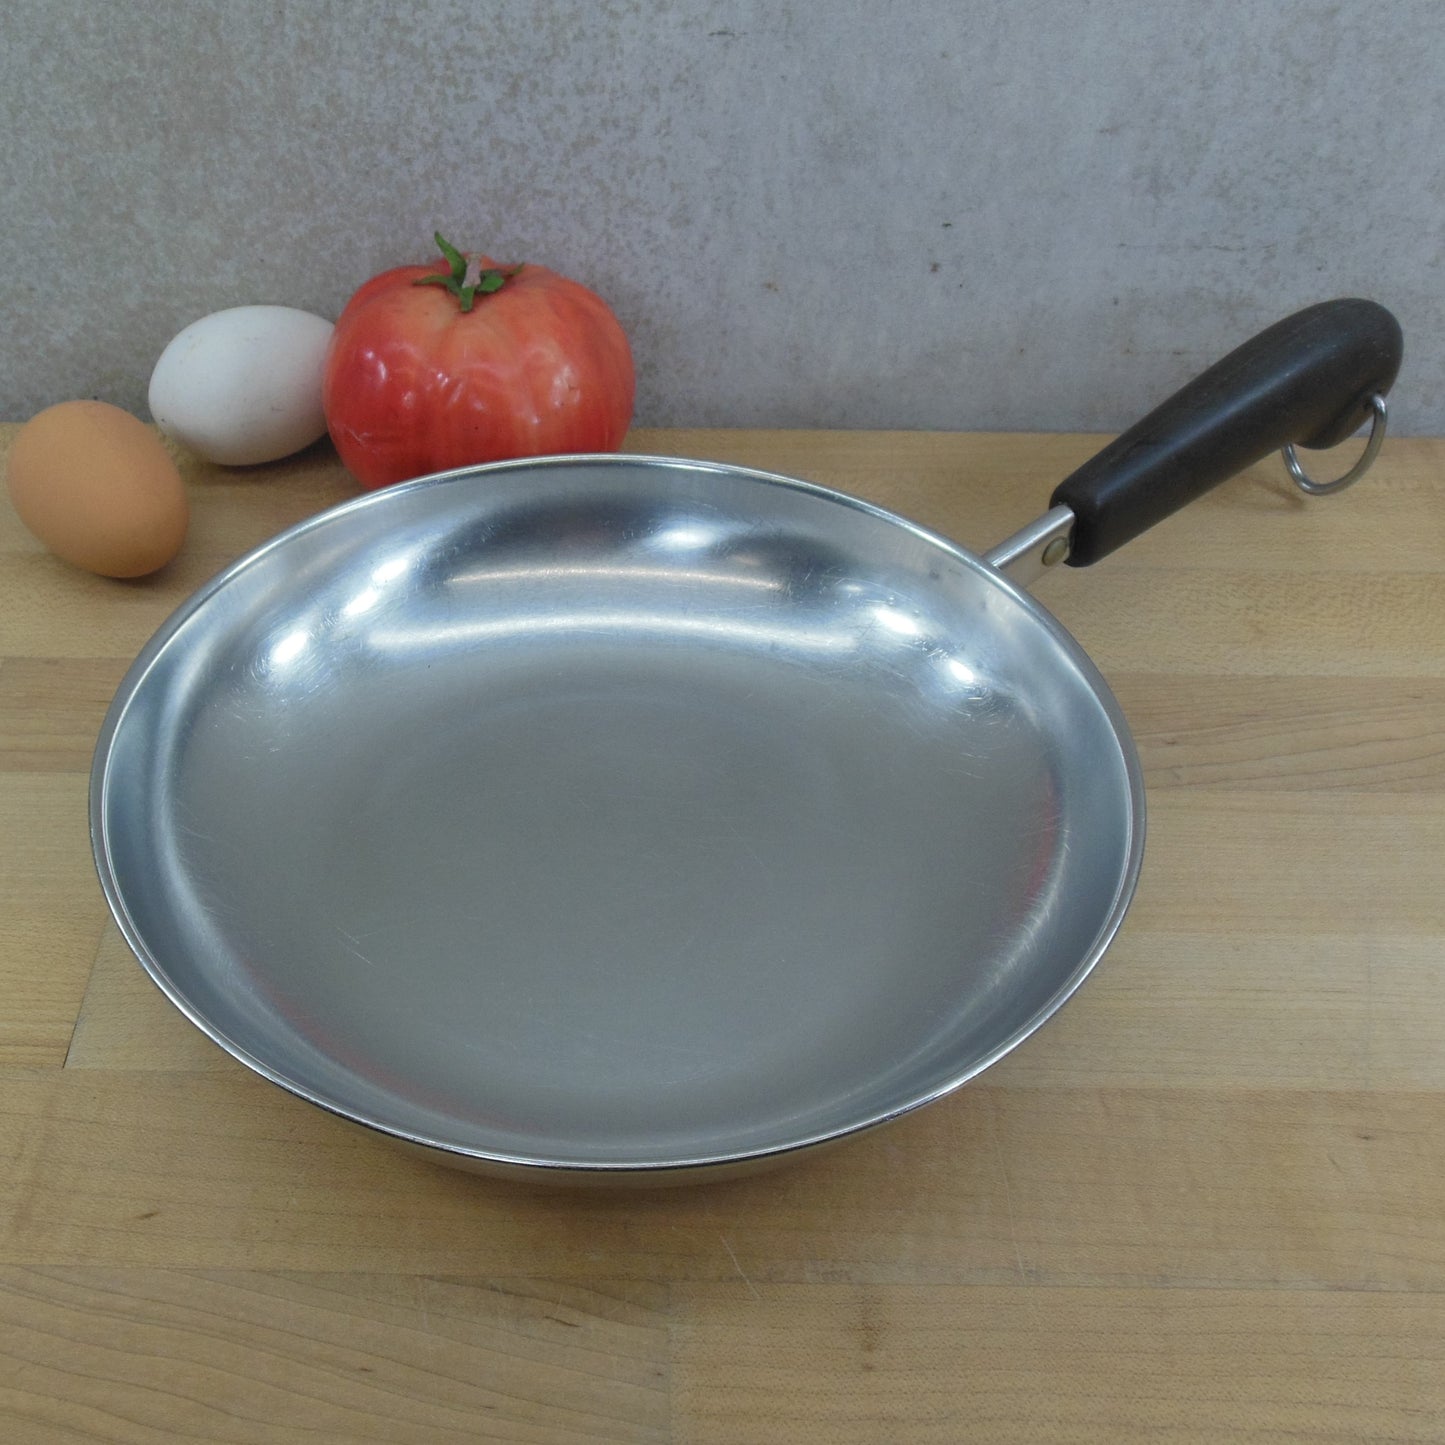 Revere Ware USA 8" Omelet Pan Stainless Steel Copper Clad